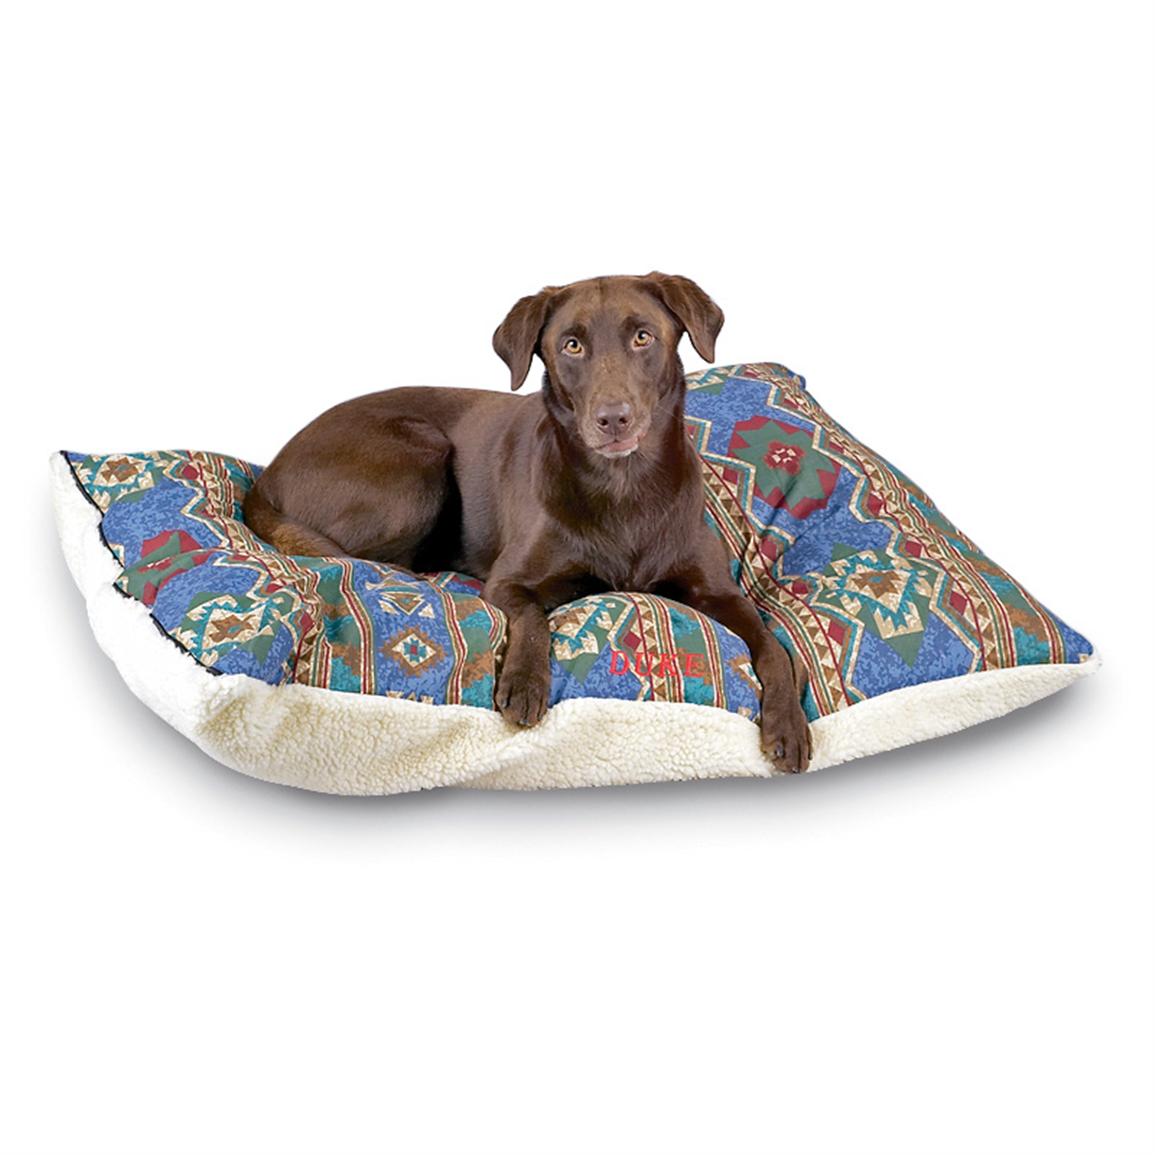 Comfort Ease® Large Heated Pet Bed - 208873, Kennels & Beds at